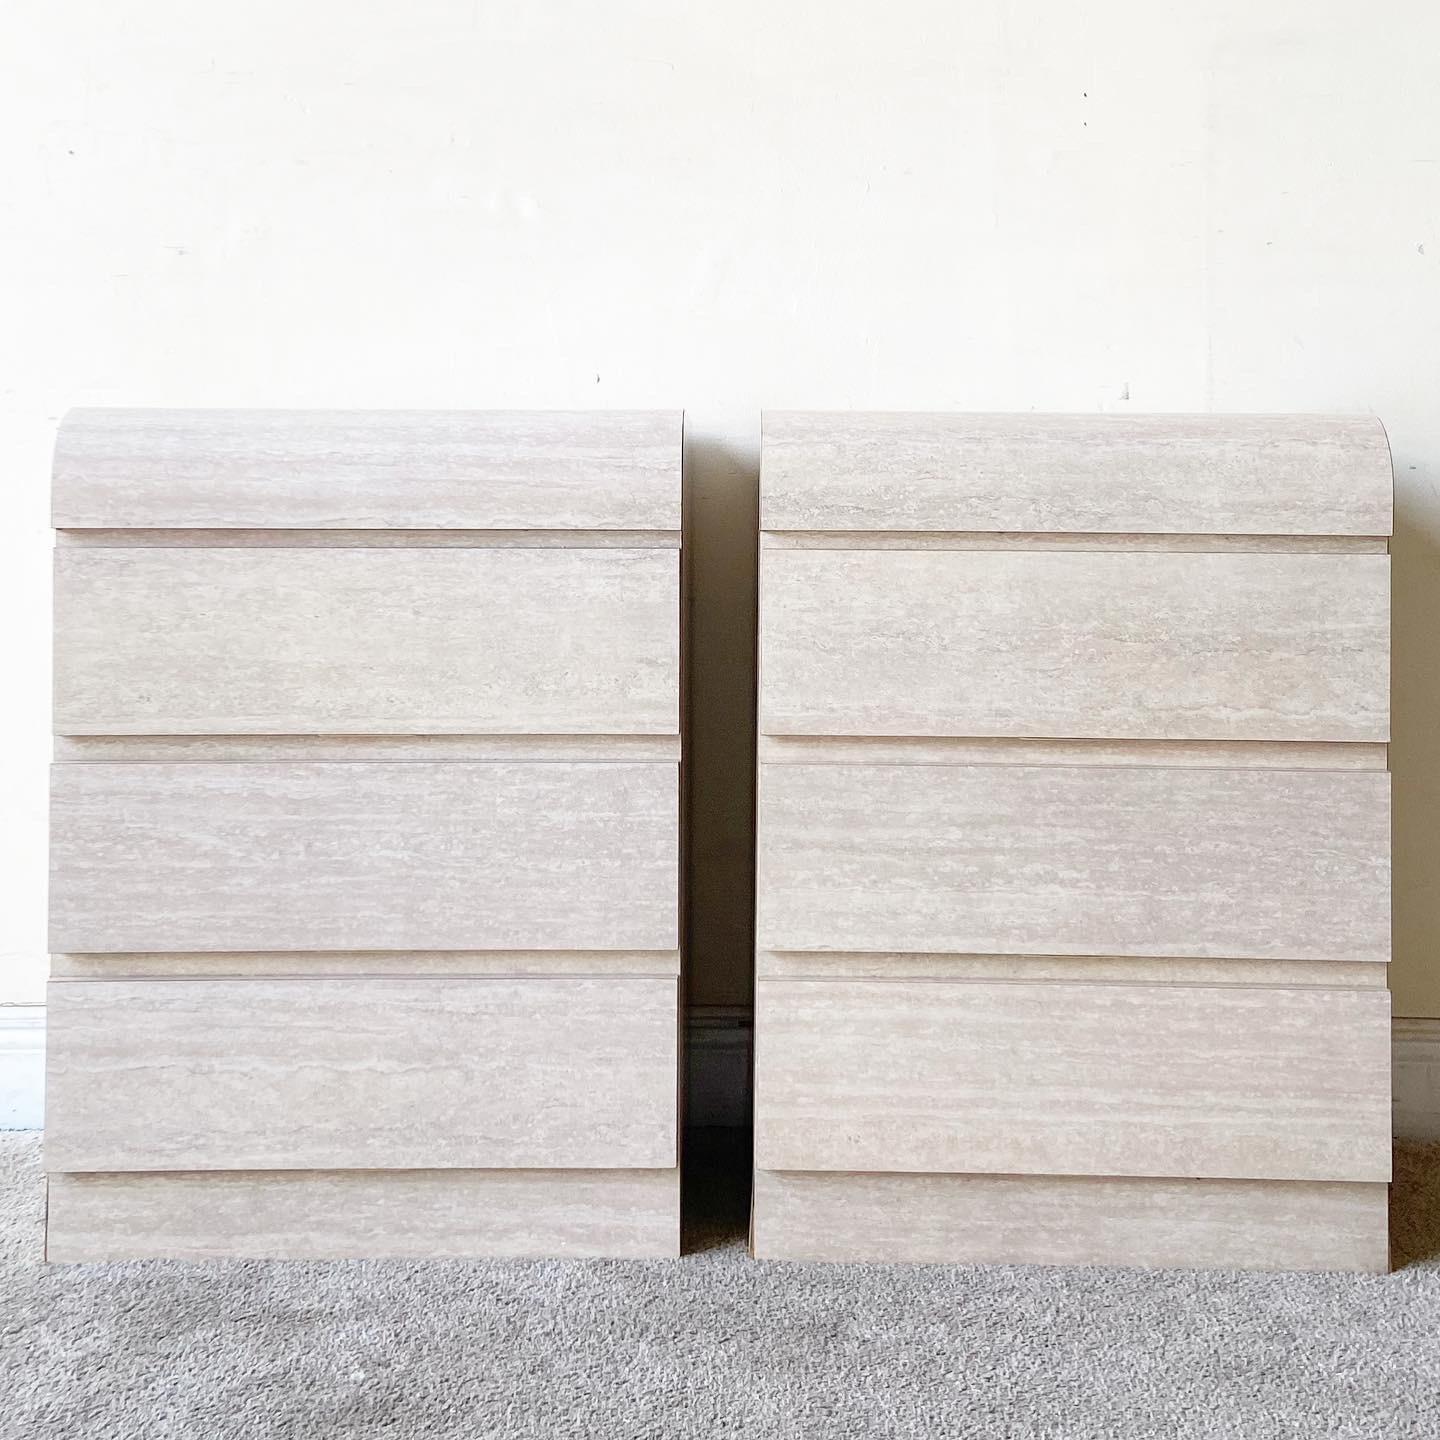 Amazing pair of postmodern waterfall nightstands. Each features 3 spacious drawers and a faux travertine laminate.
   